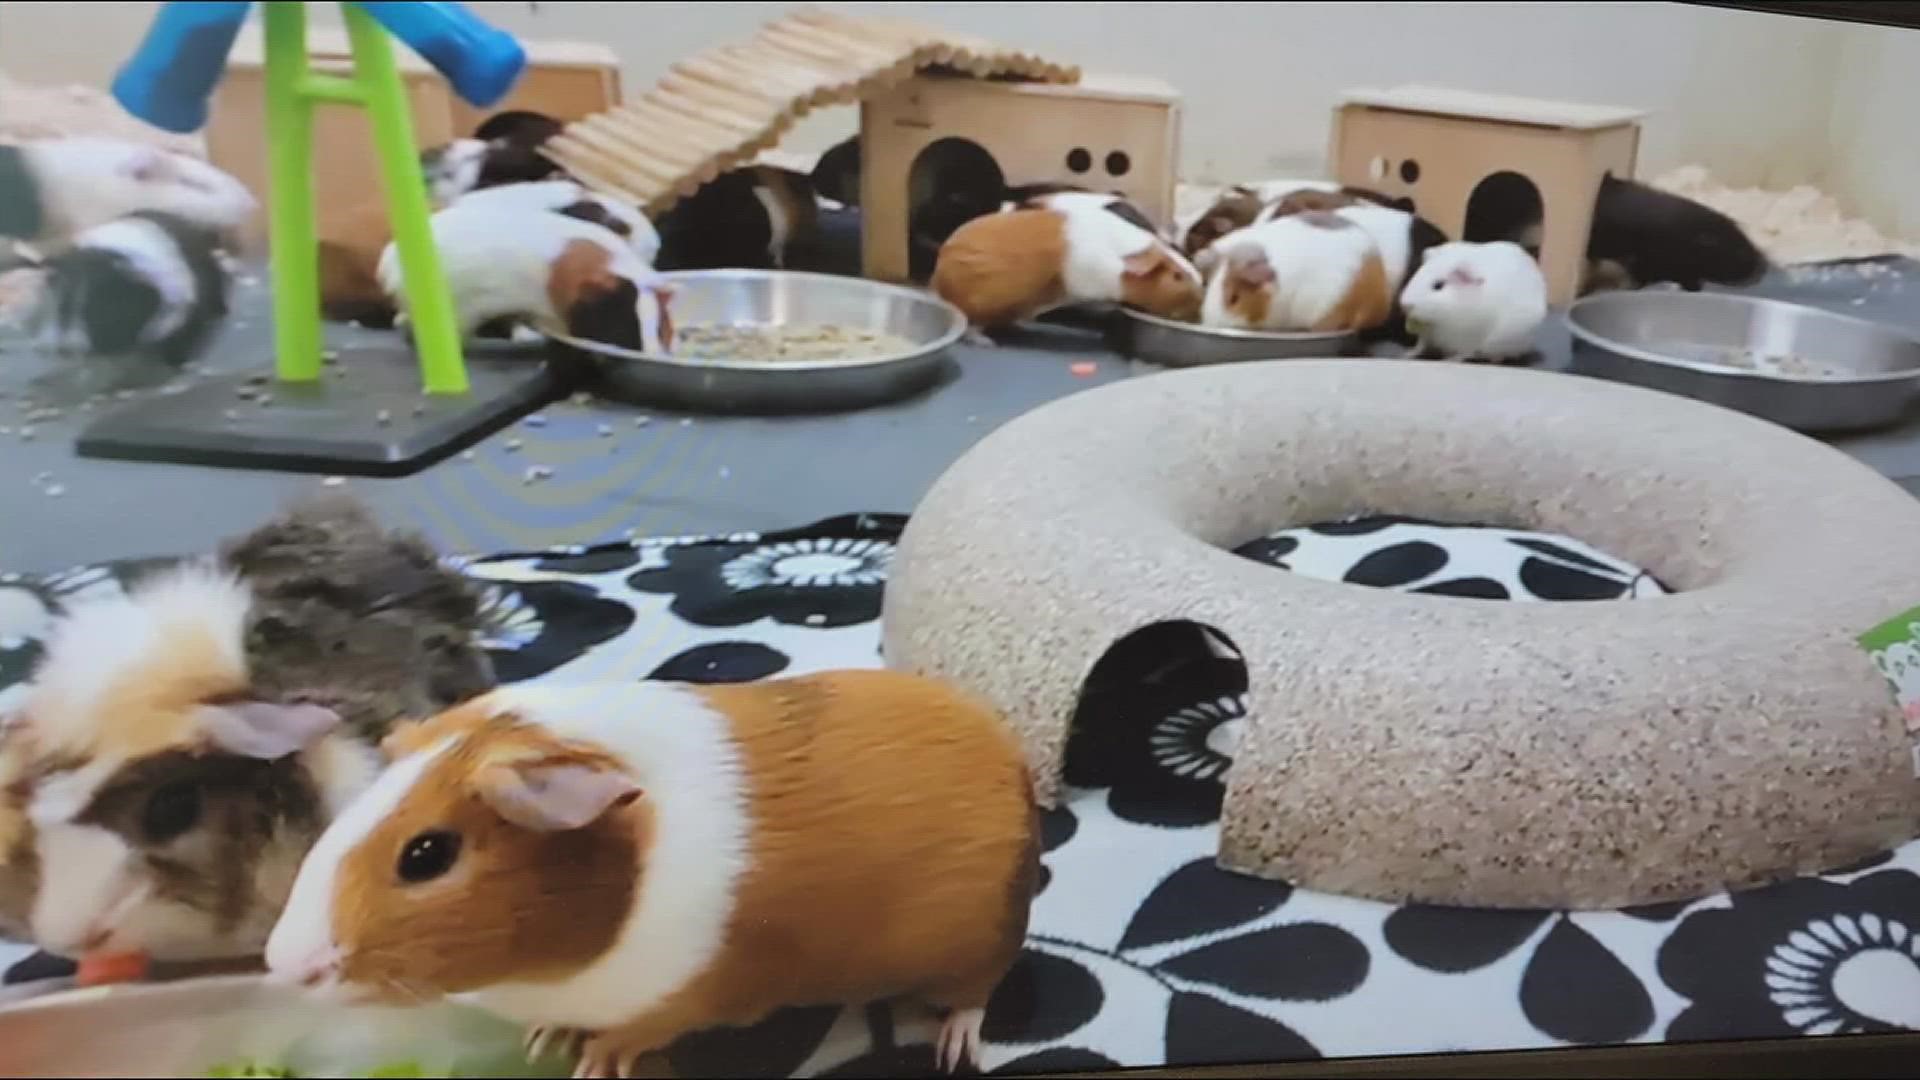 The all-female group, which staff calls "The Golden Girls All-Star Guinea Pig Herd", will be getting its own exhibit soon.